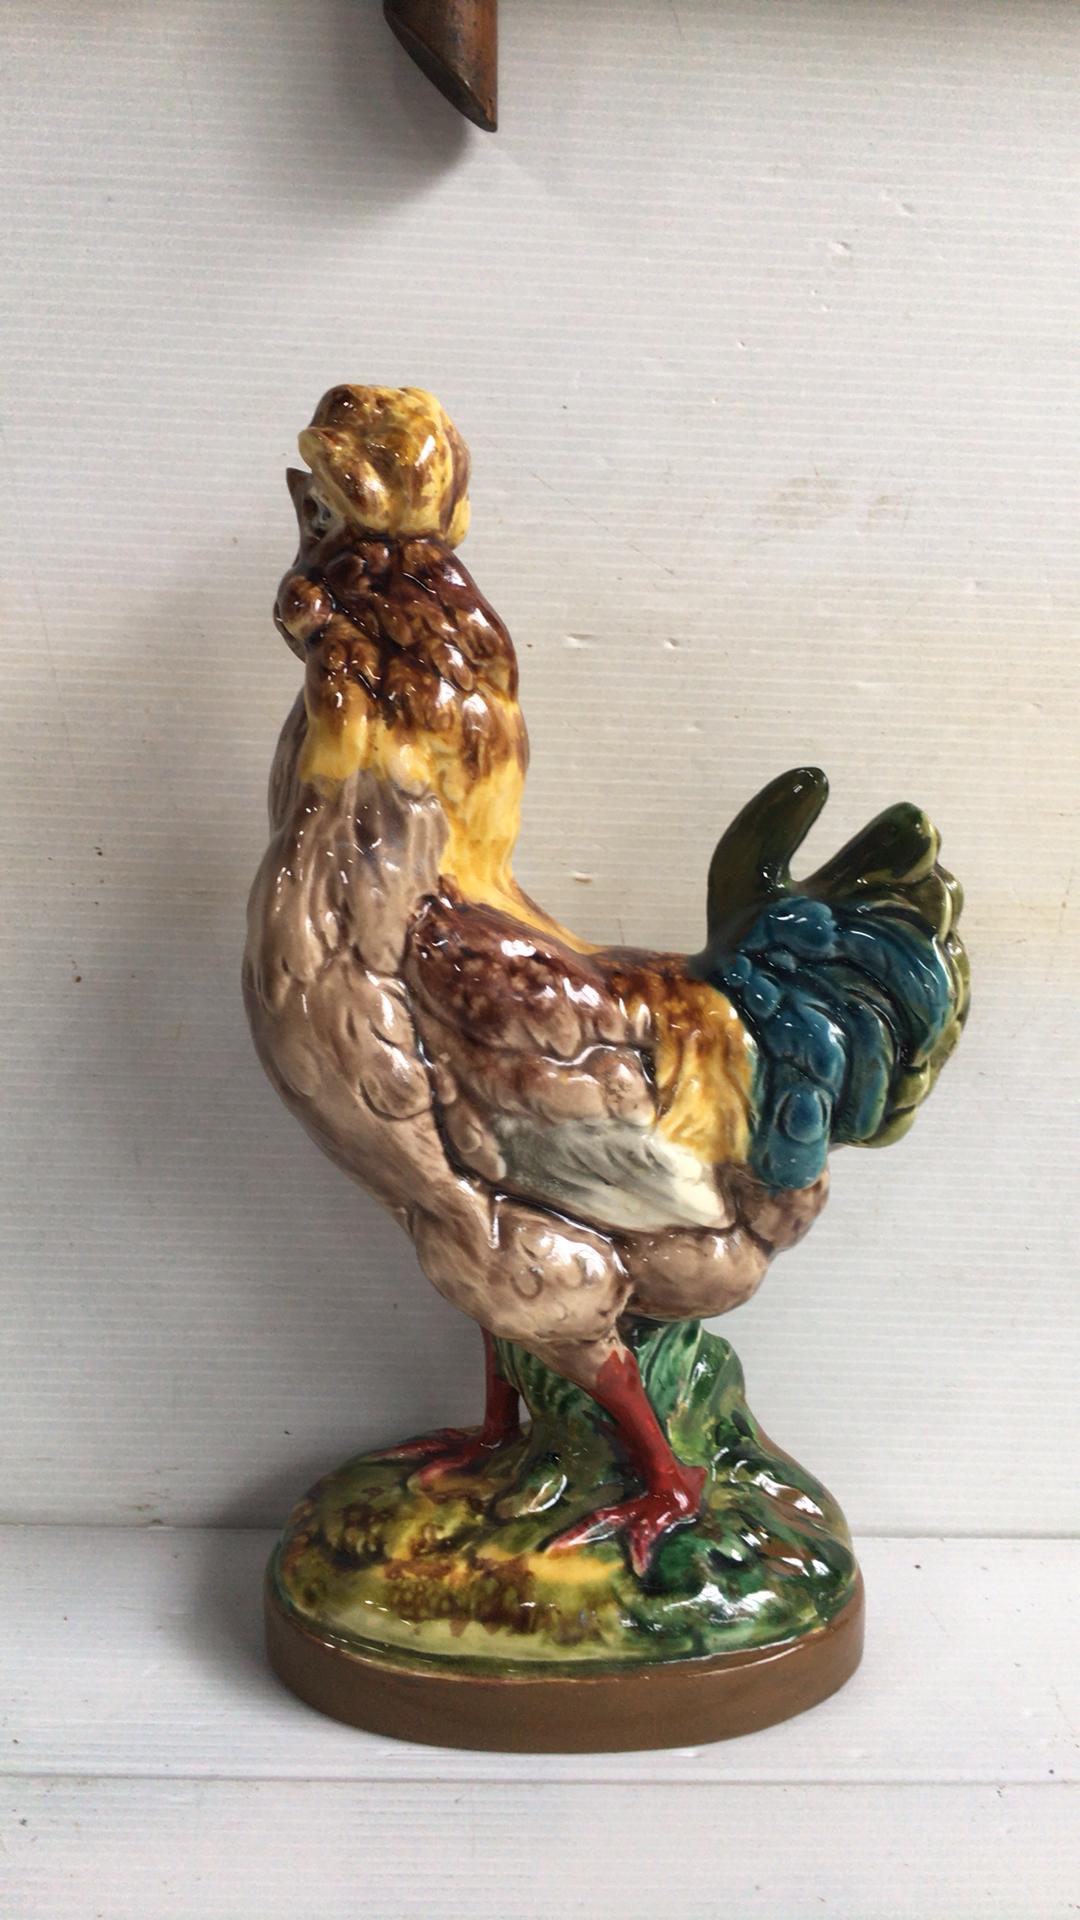 19th century French Majolica rooster attributed to George Dreyfus
Measures: Height / 10.5 inches, length / 6 by 3.5 inches.